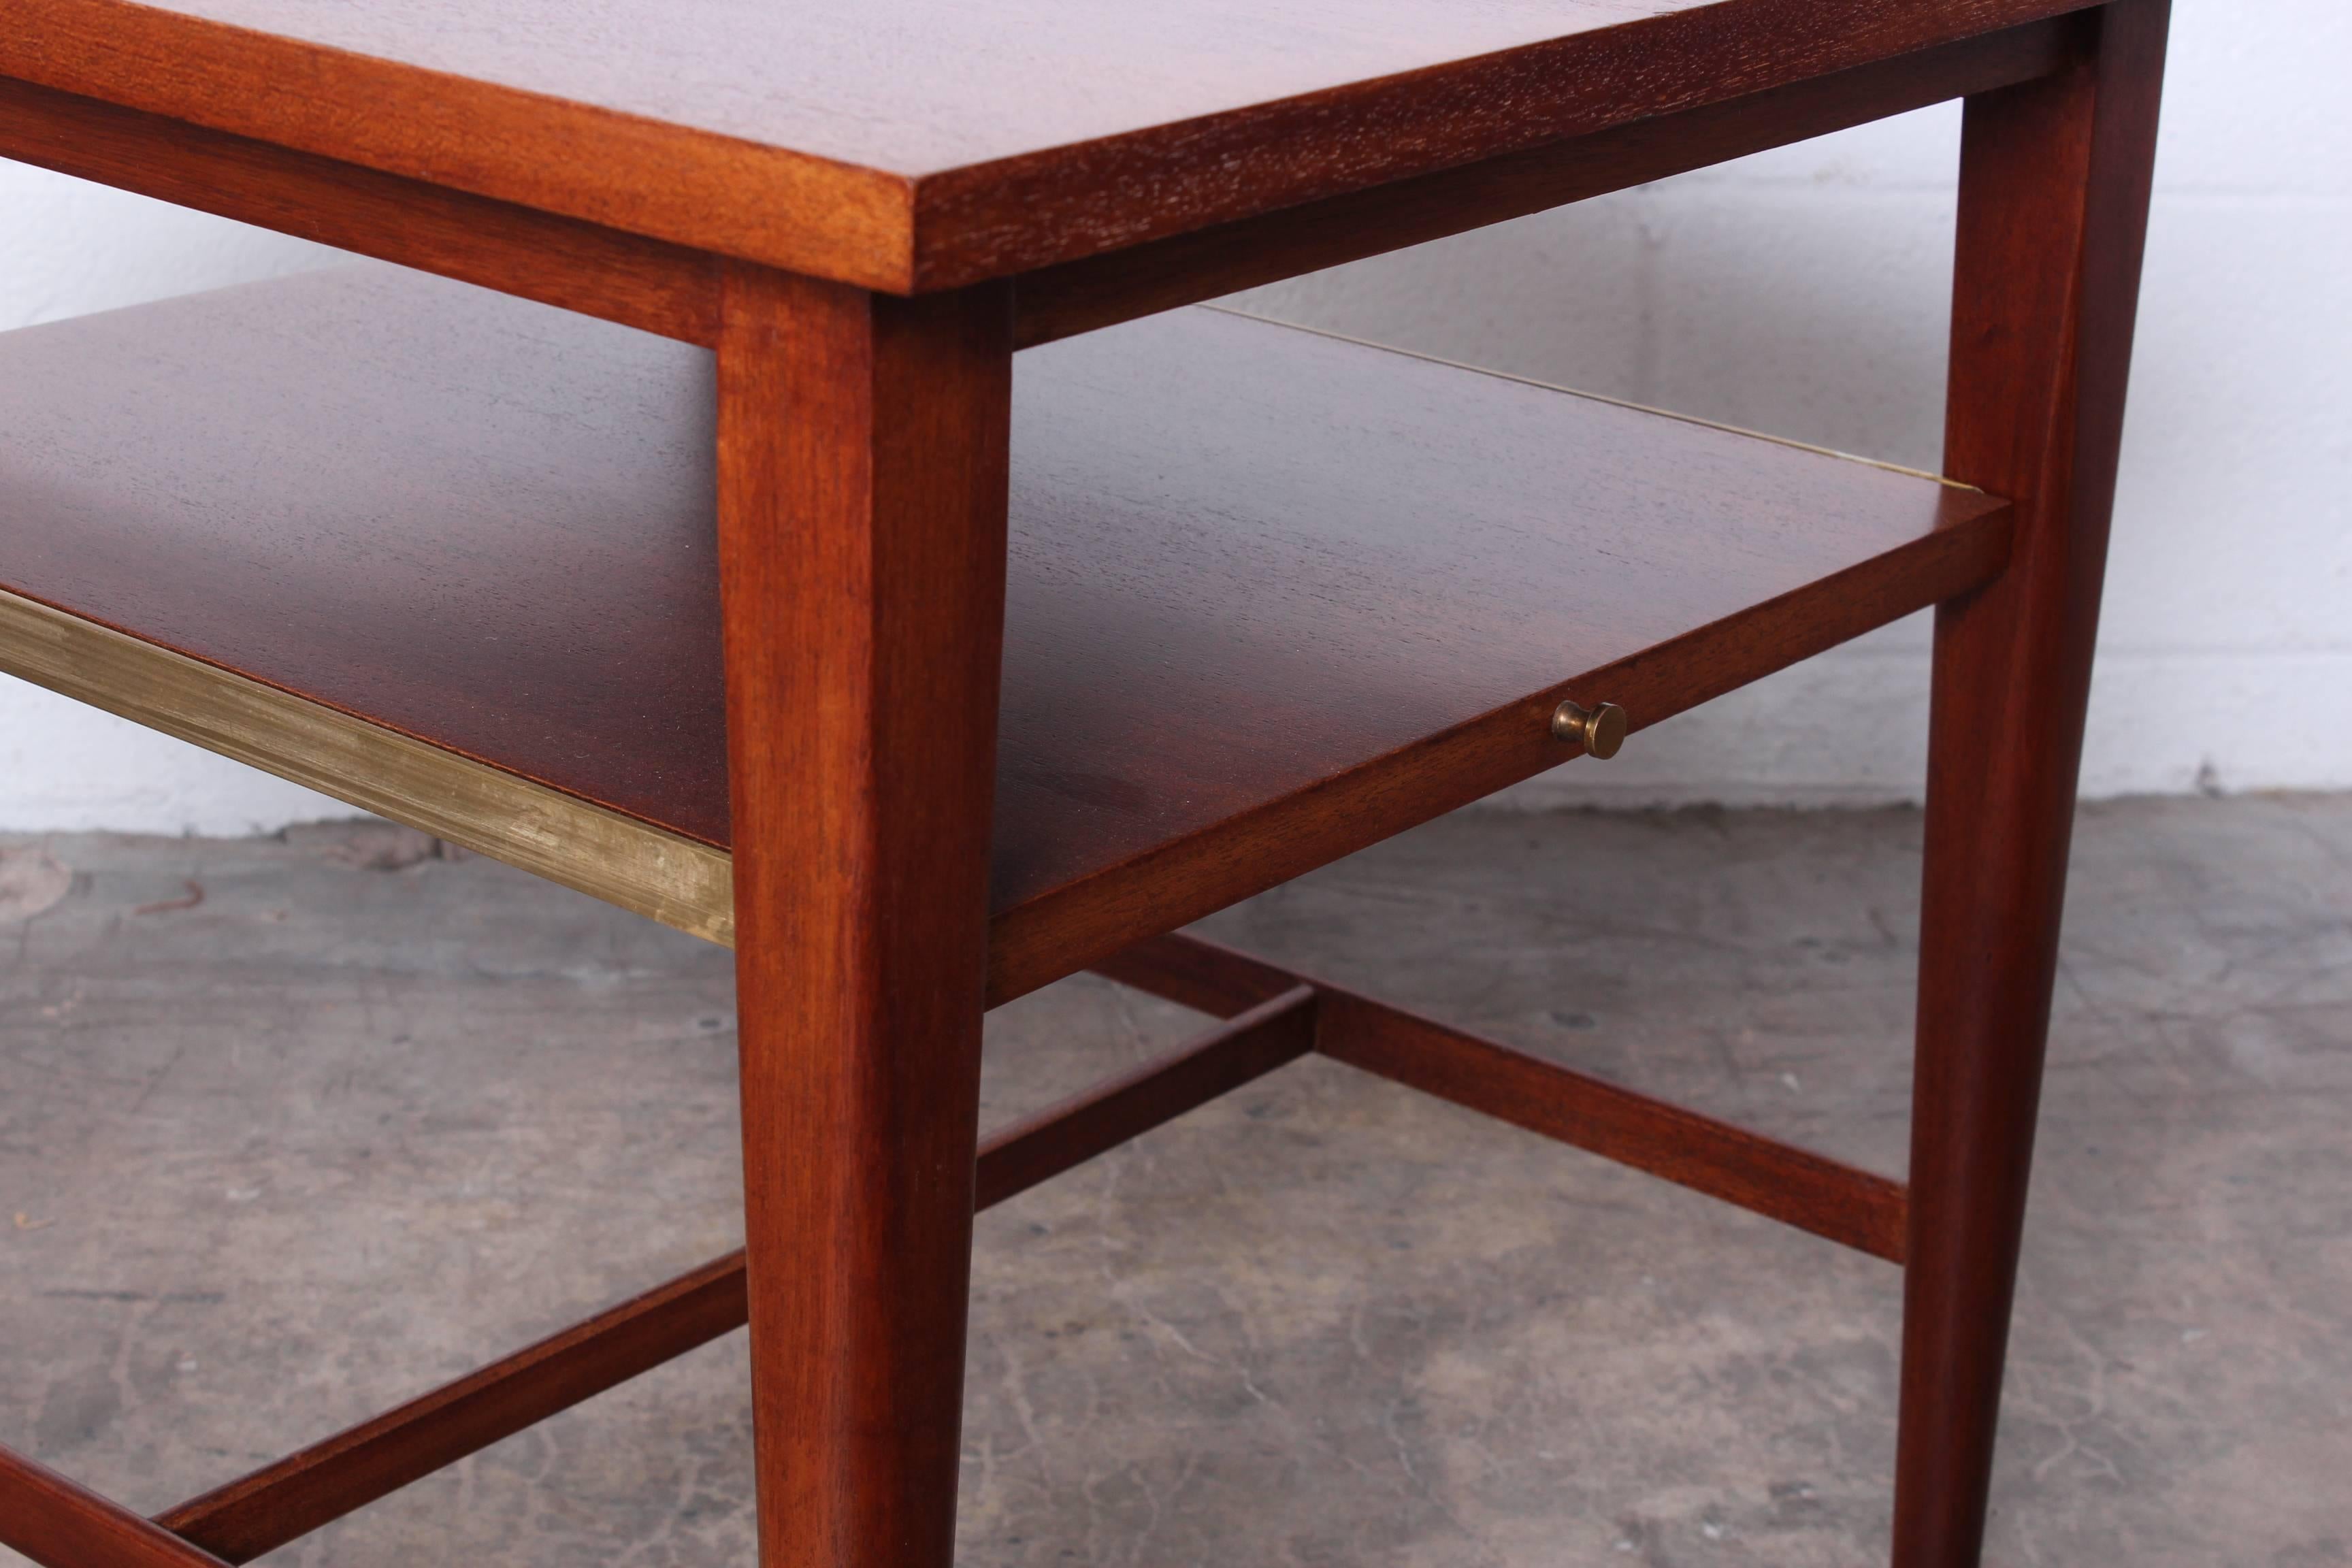 A pair of mahogany tables with slide out shelves. Designed by Paul McCobb for Calvin.